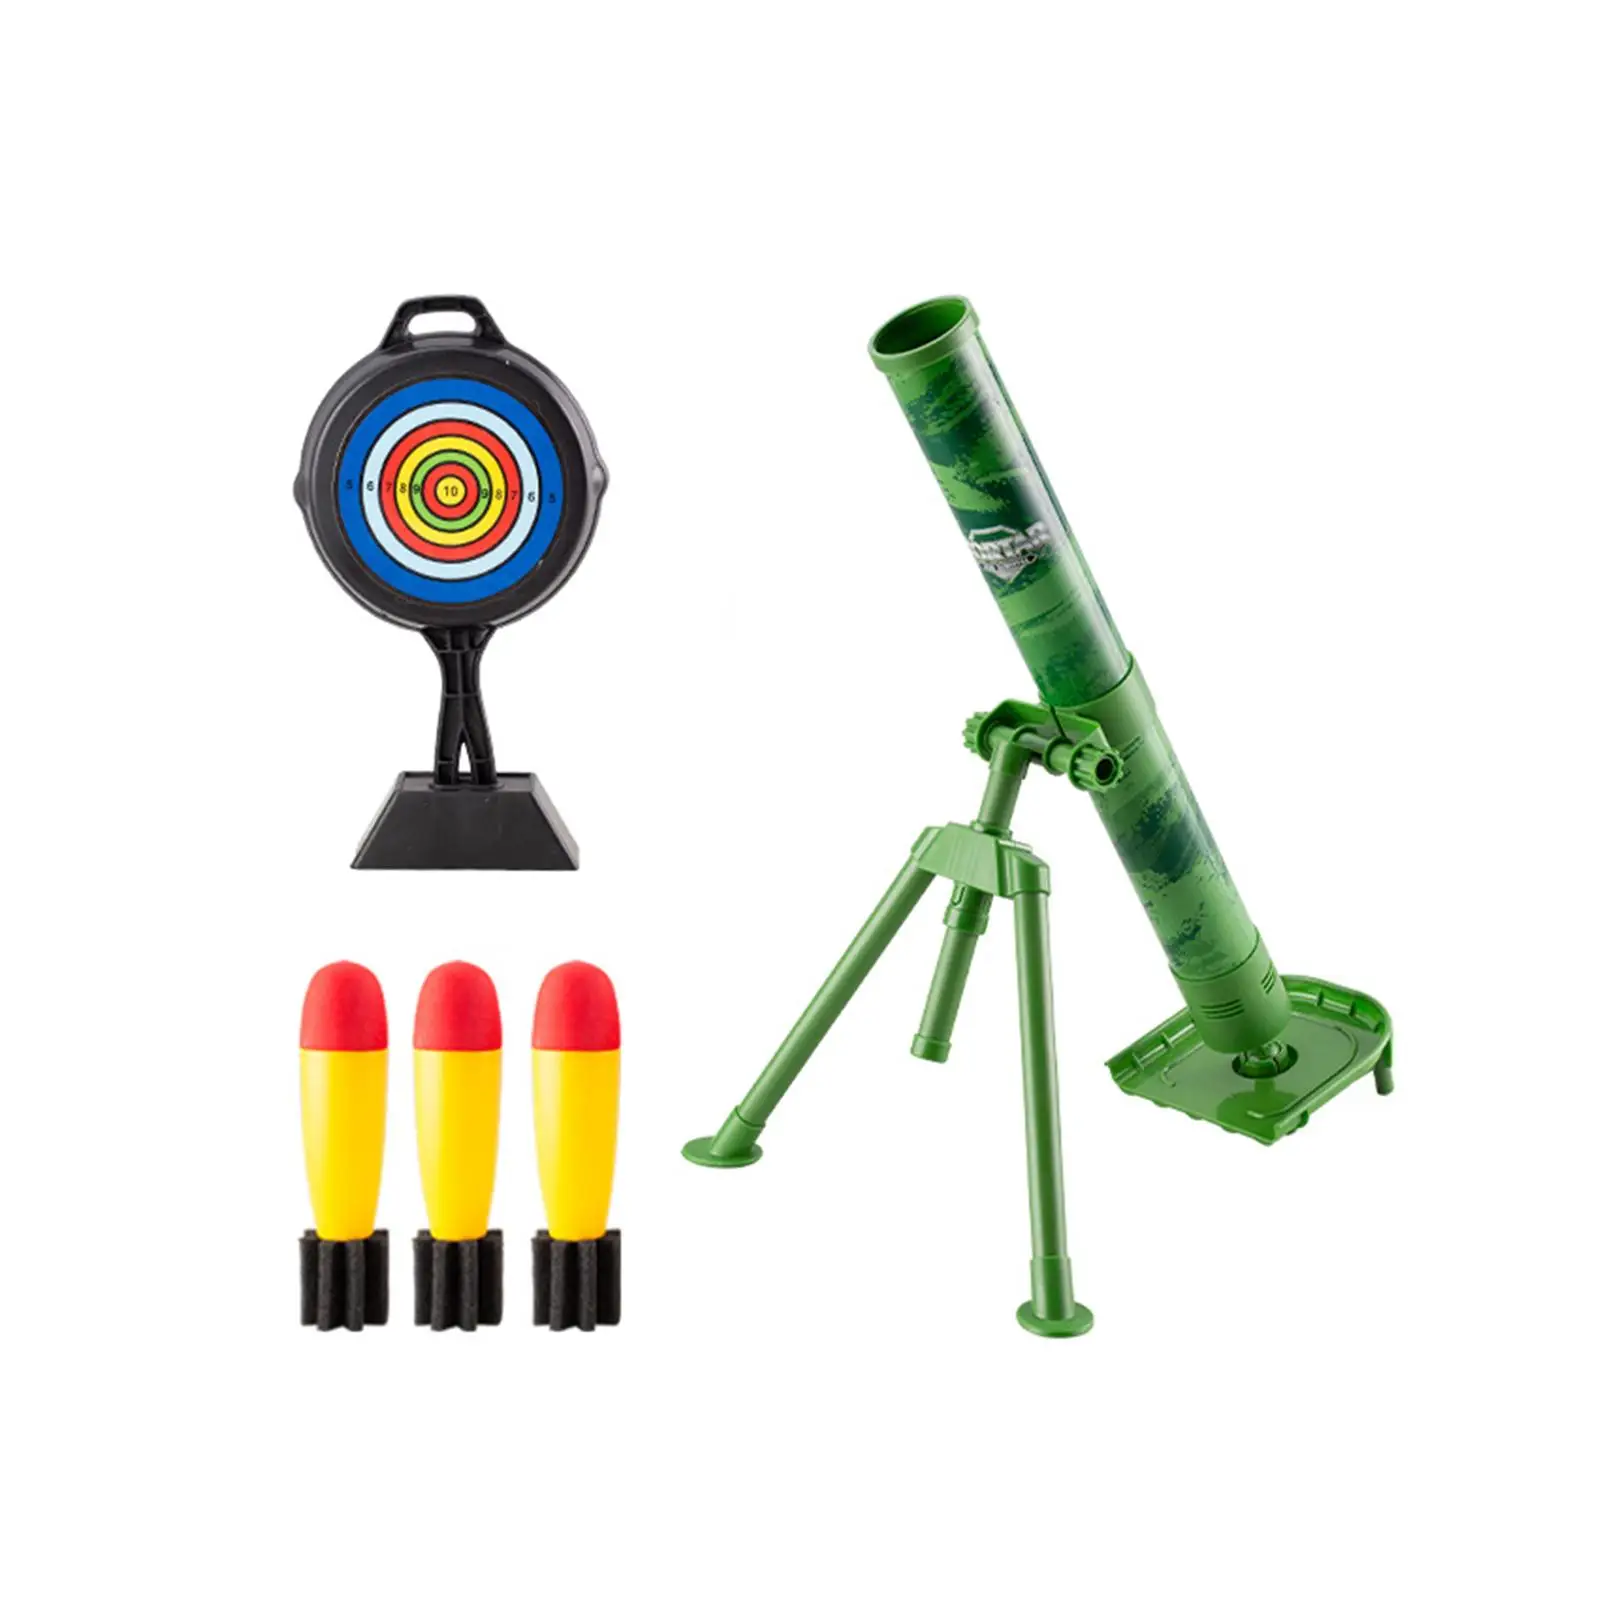 Mortar Launcher Toy Set Professional Interactive Games Best Gift Blasters Toys Game for Boys and Girls Festival Gifts